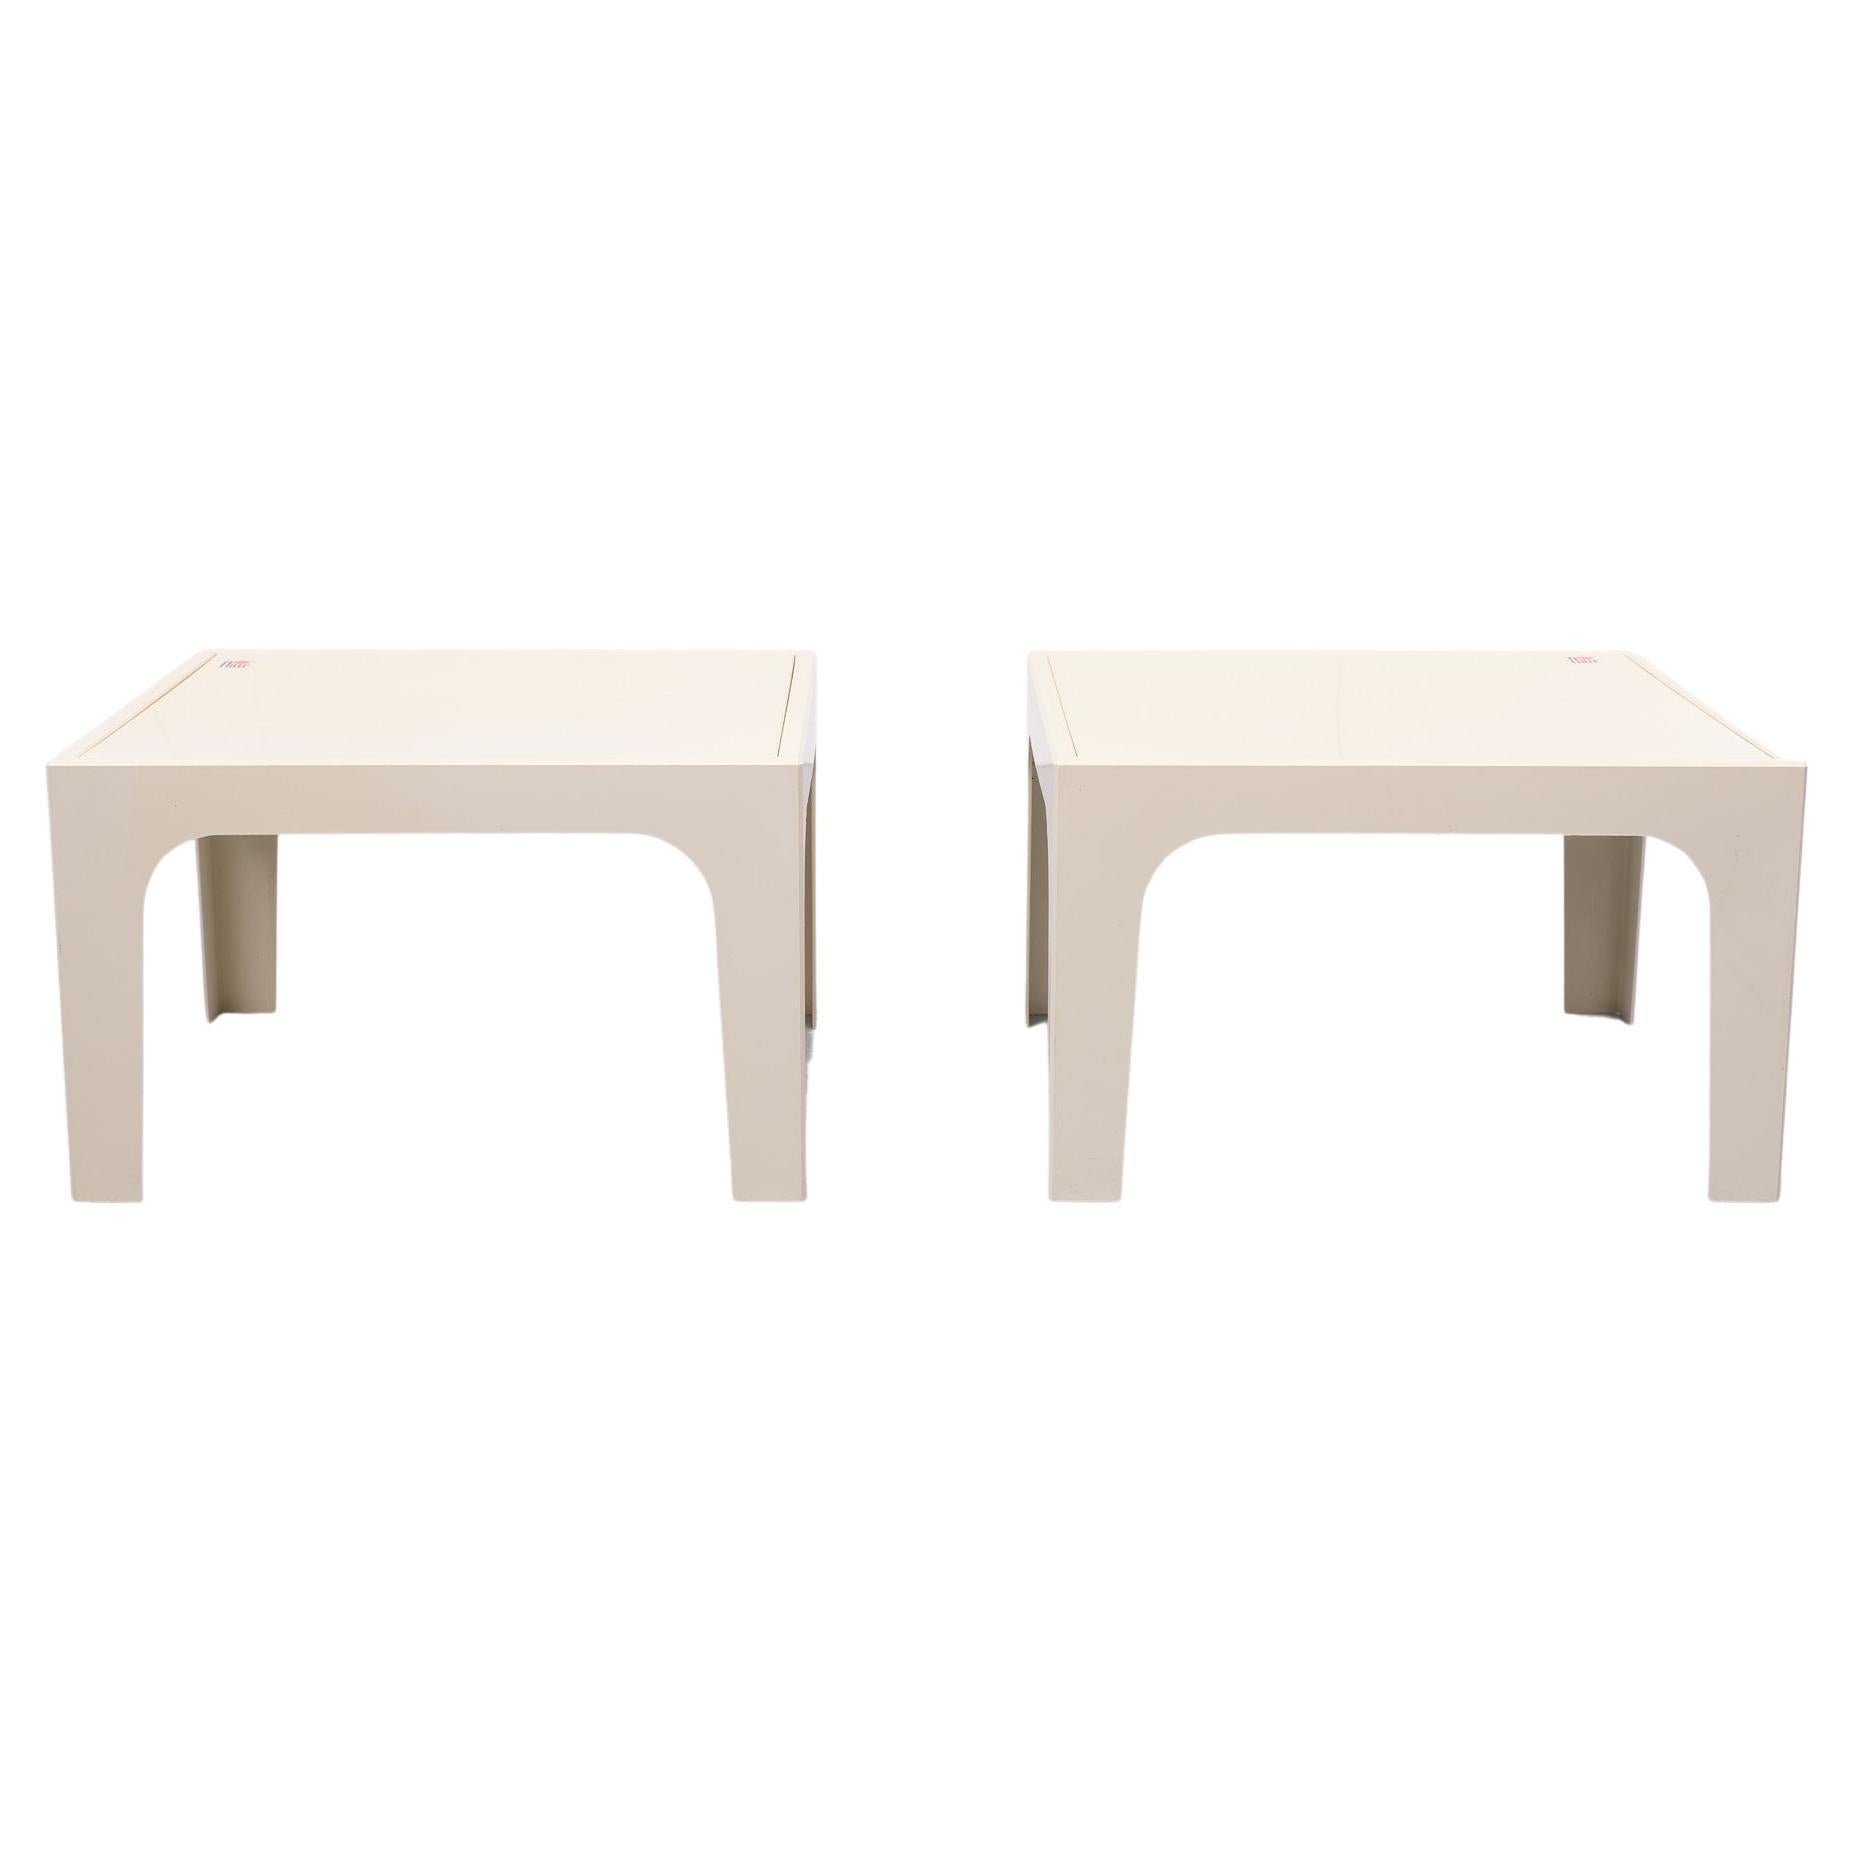 Very nice Space Ace side tables. Manufactured by Flair for Prisunic Holland. Design by Marc Held 1972. set of Two. Normal Wear and Tear. Off White color. Signed Flair.
 